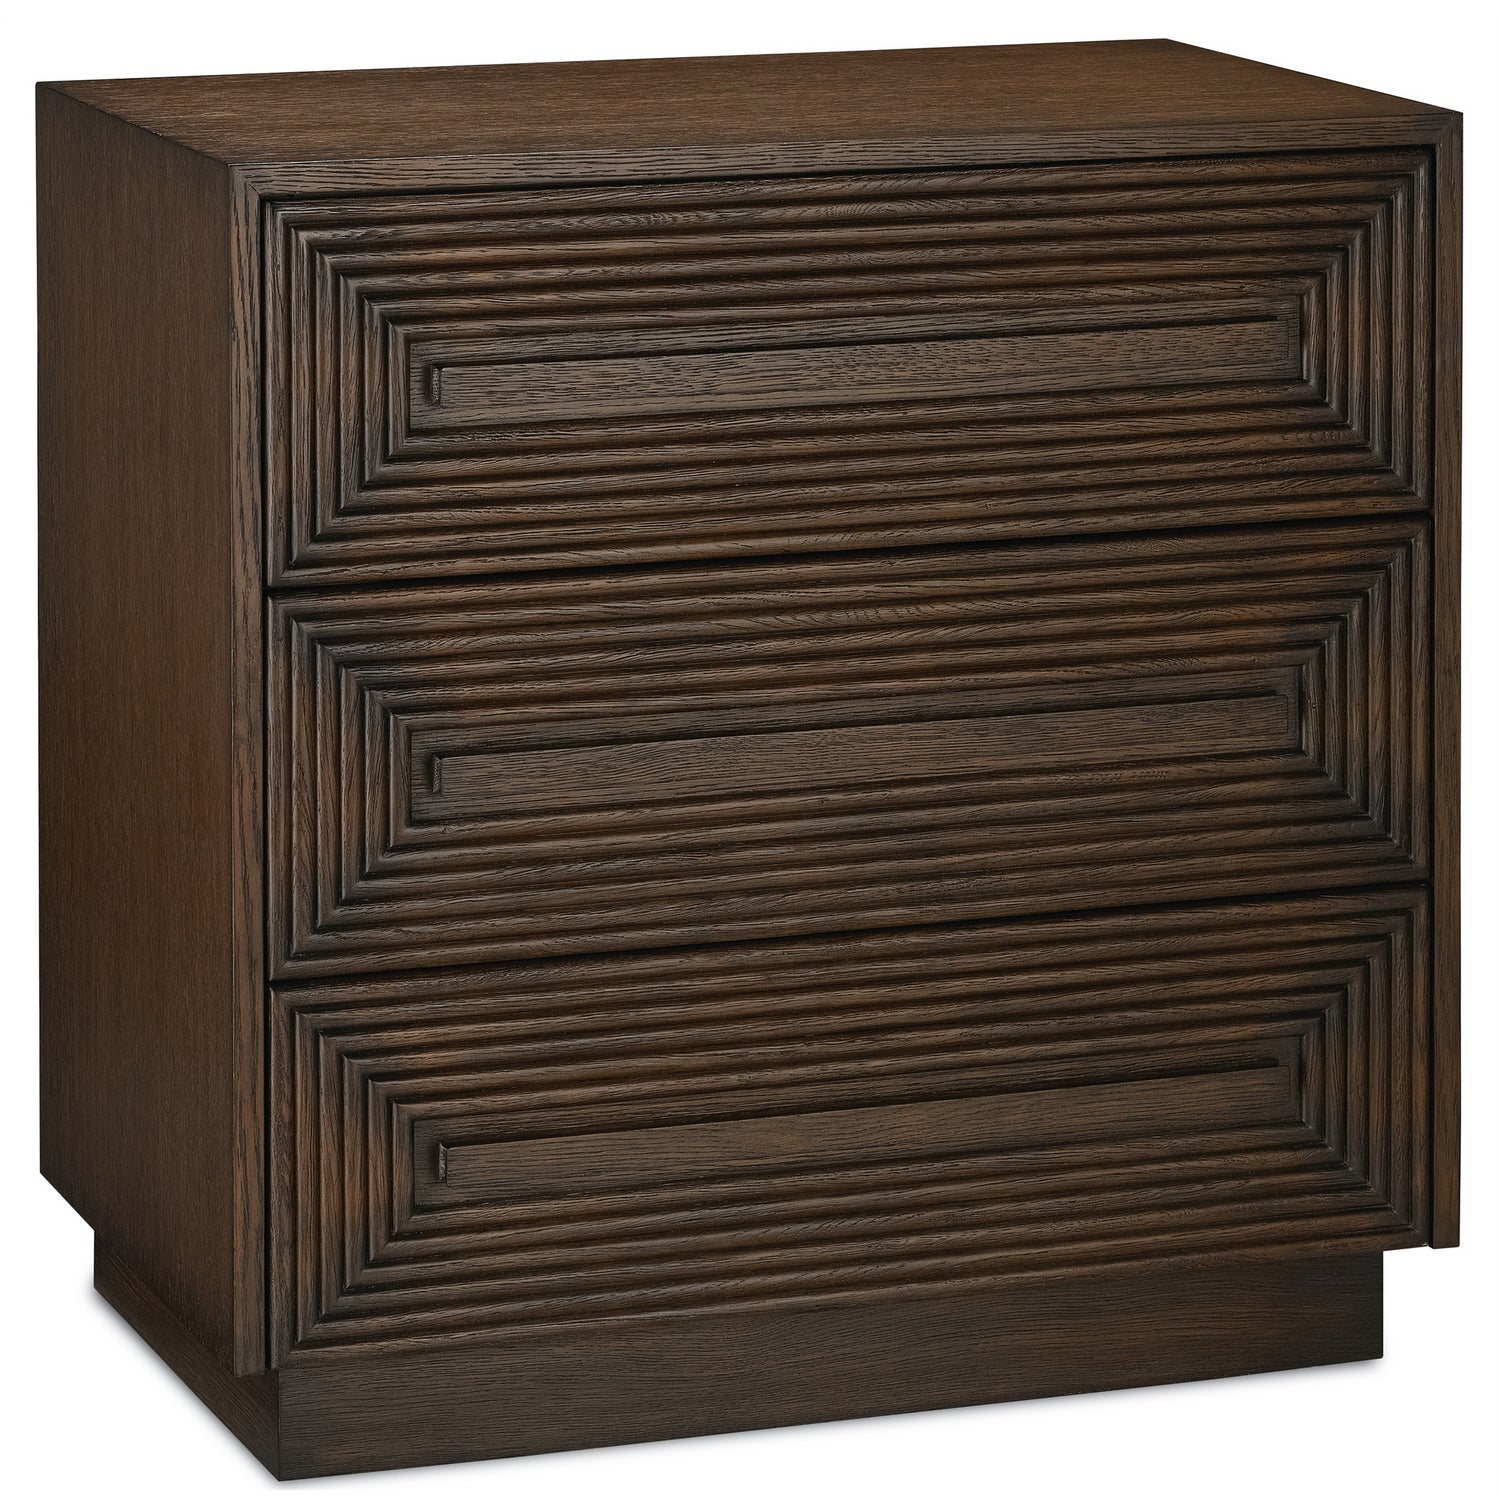 Chest from the Morombe collection in Distressed Cocoa finish